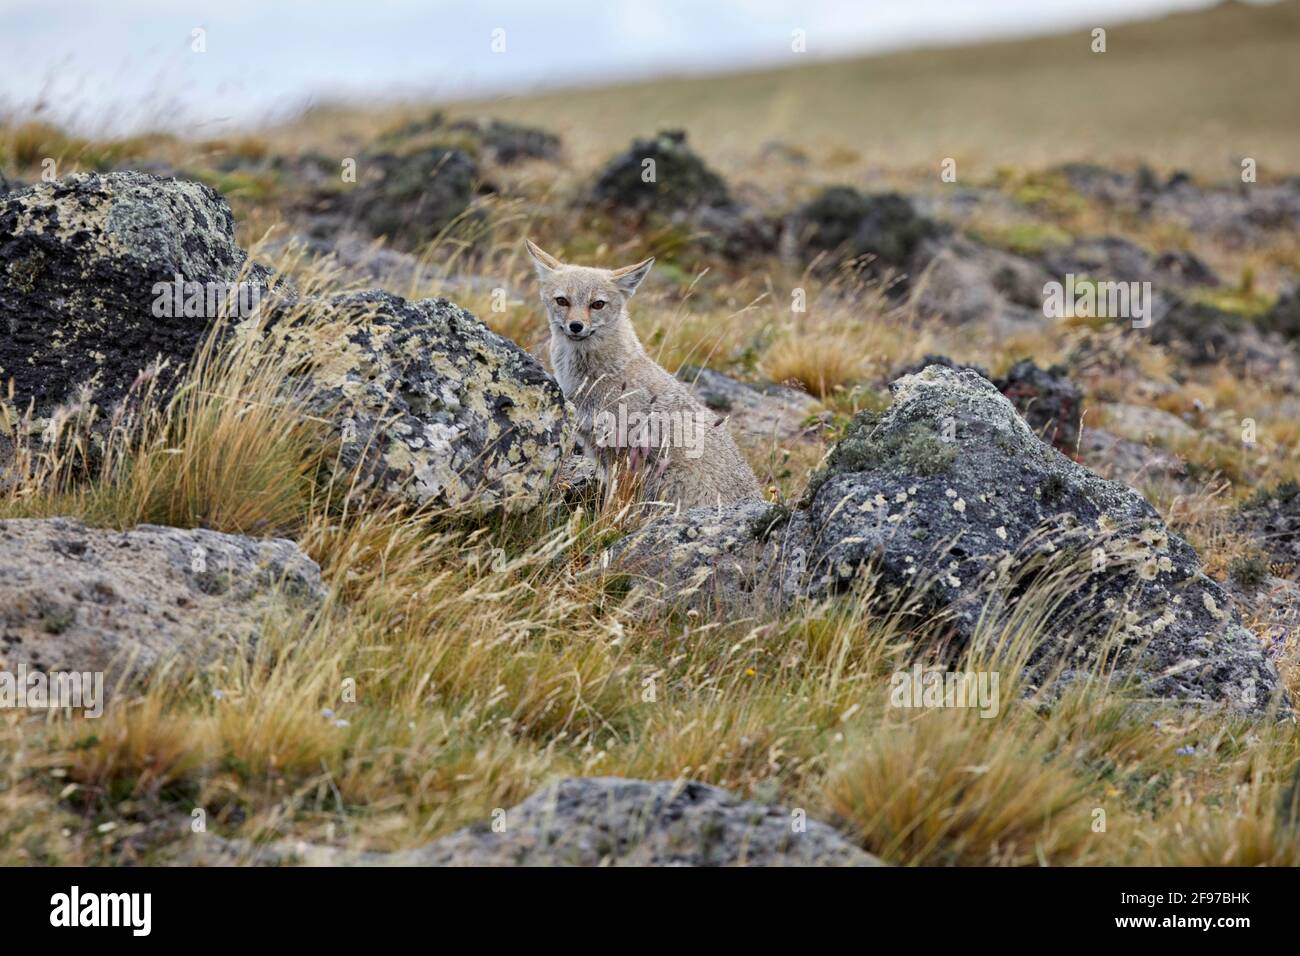 Lycalopex Griseus Patagonian Fox South American gray fox Chilla Gray Zorro in Pali Aike National Park Chile Stock Photo